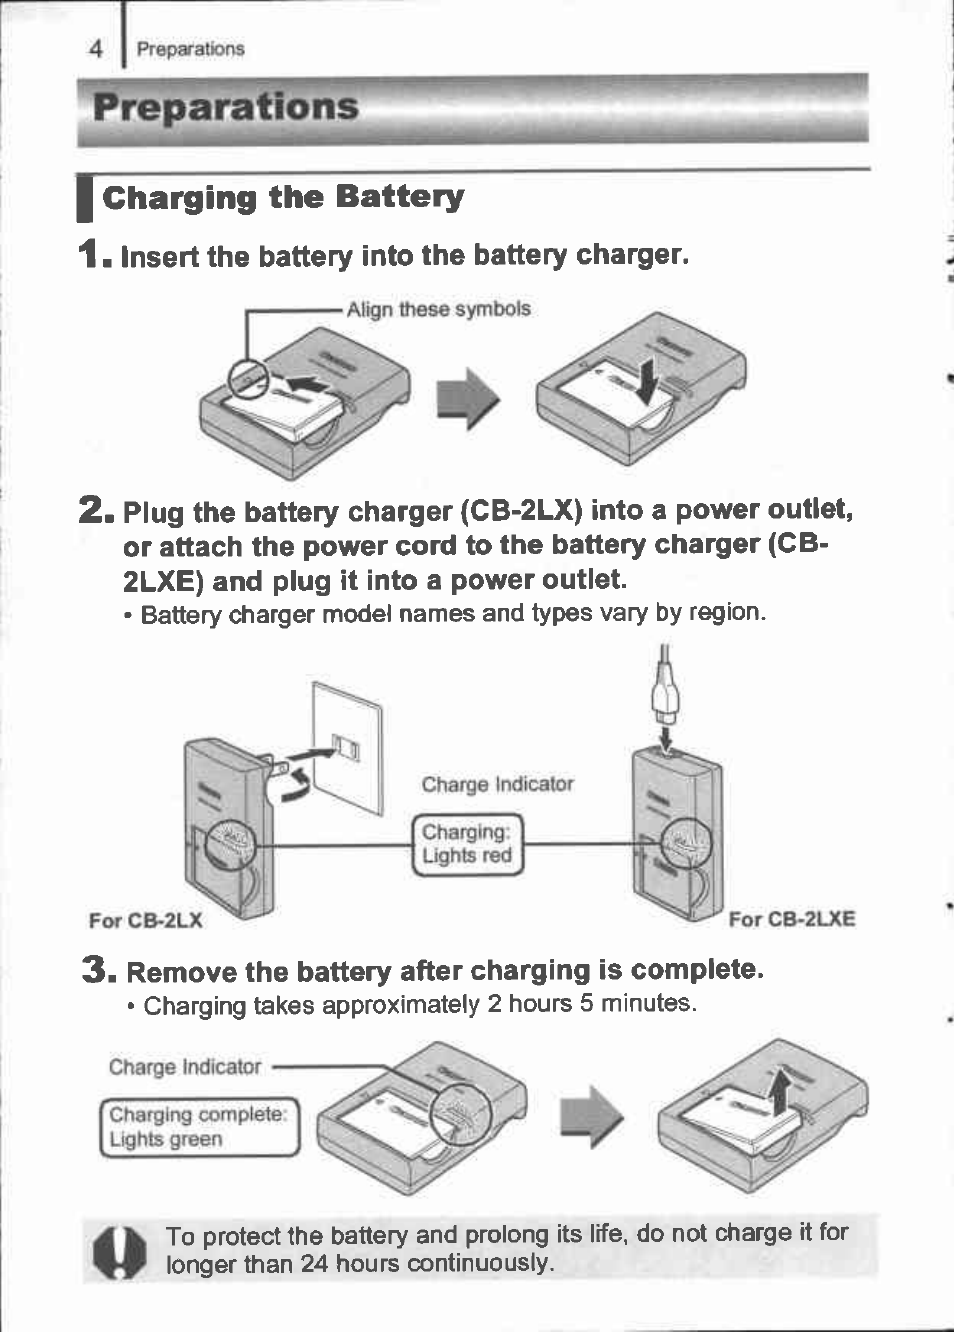 Preparations, I charging the battery | Canon IXUS 90IS User Manual | Page 6 / 36